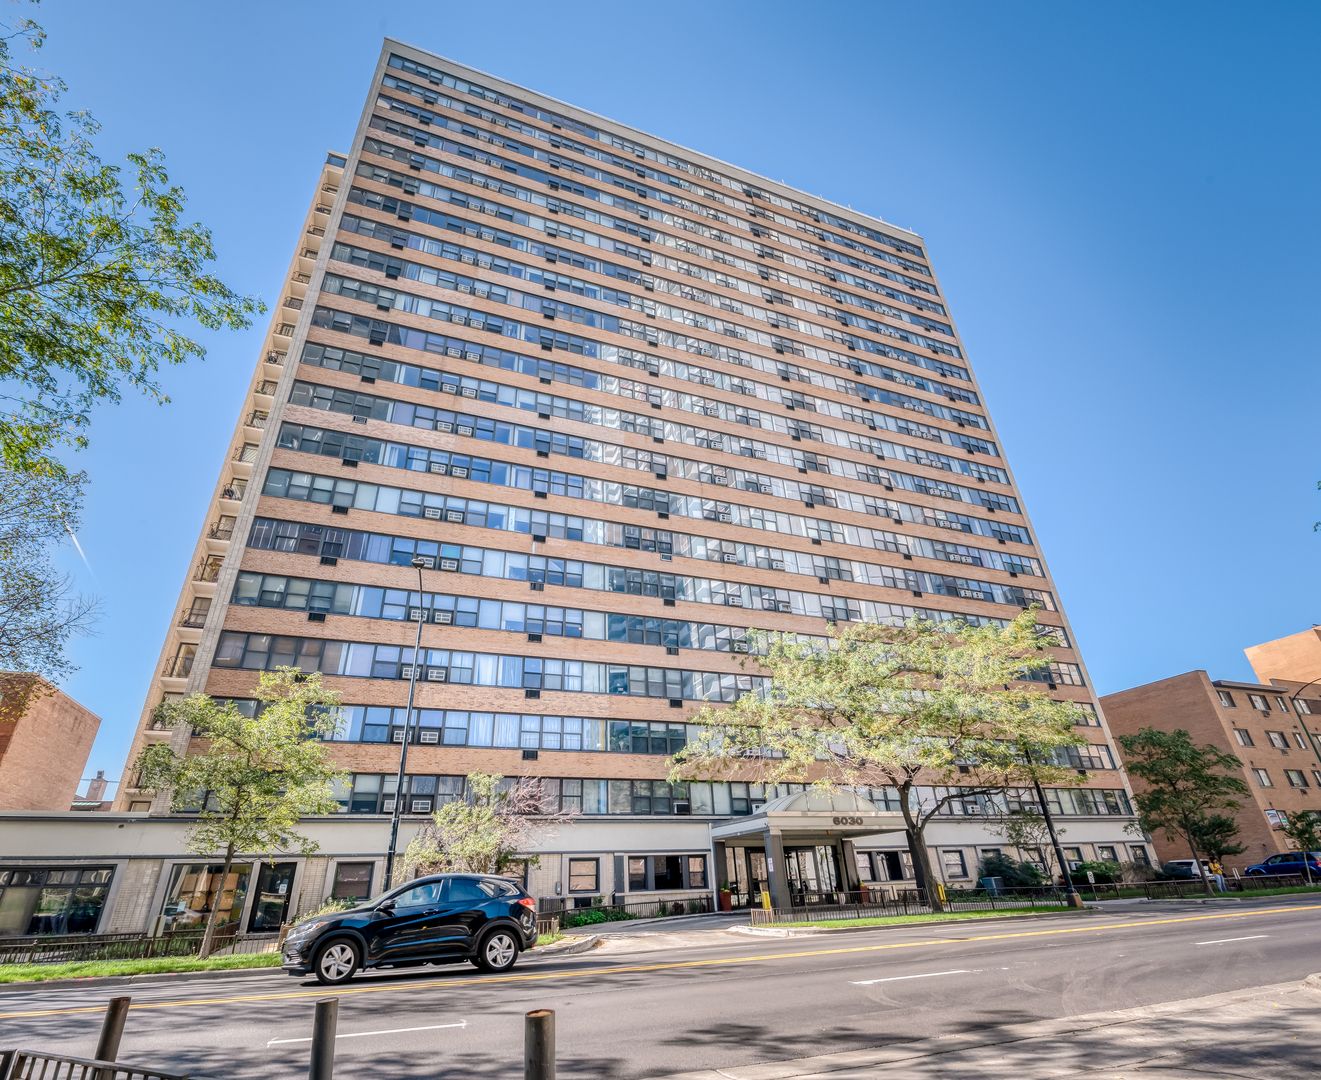 Main Photo: 6030 N Sheridan Road Unit 806 in Chicago: CHI - Edgewater Residential for sale ()  : MLS®# 11440867